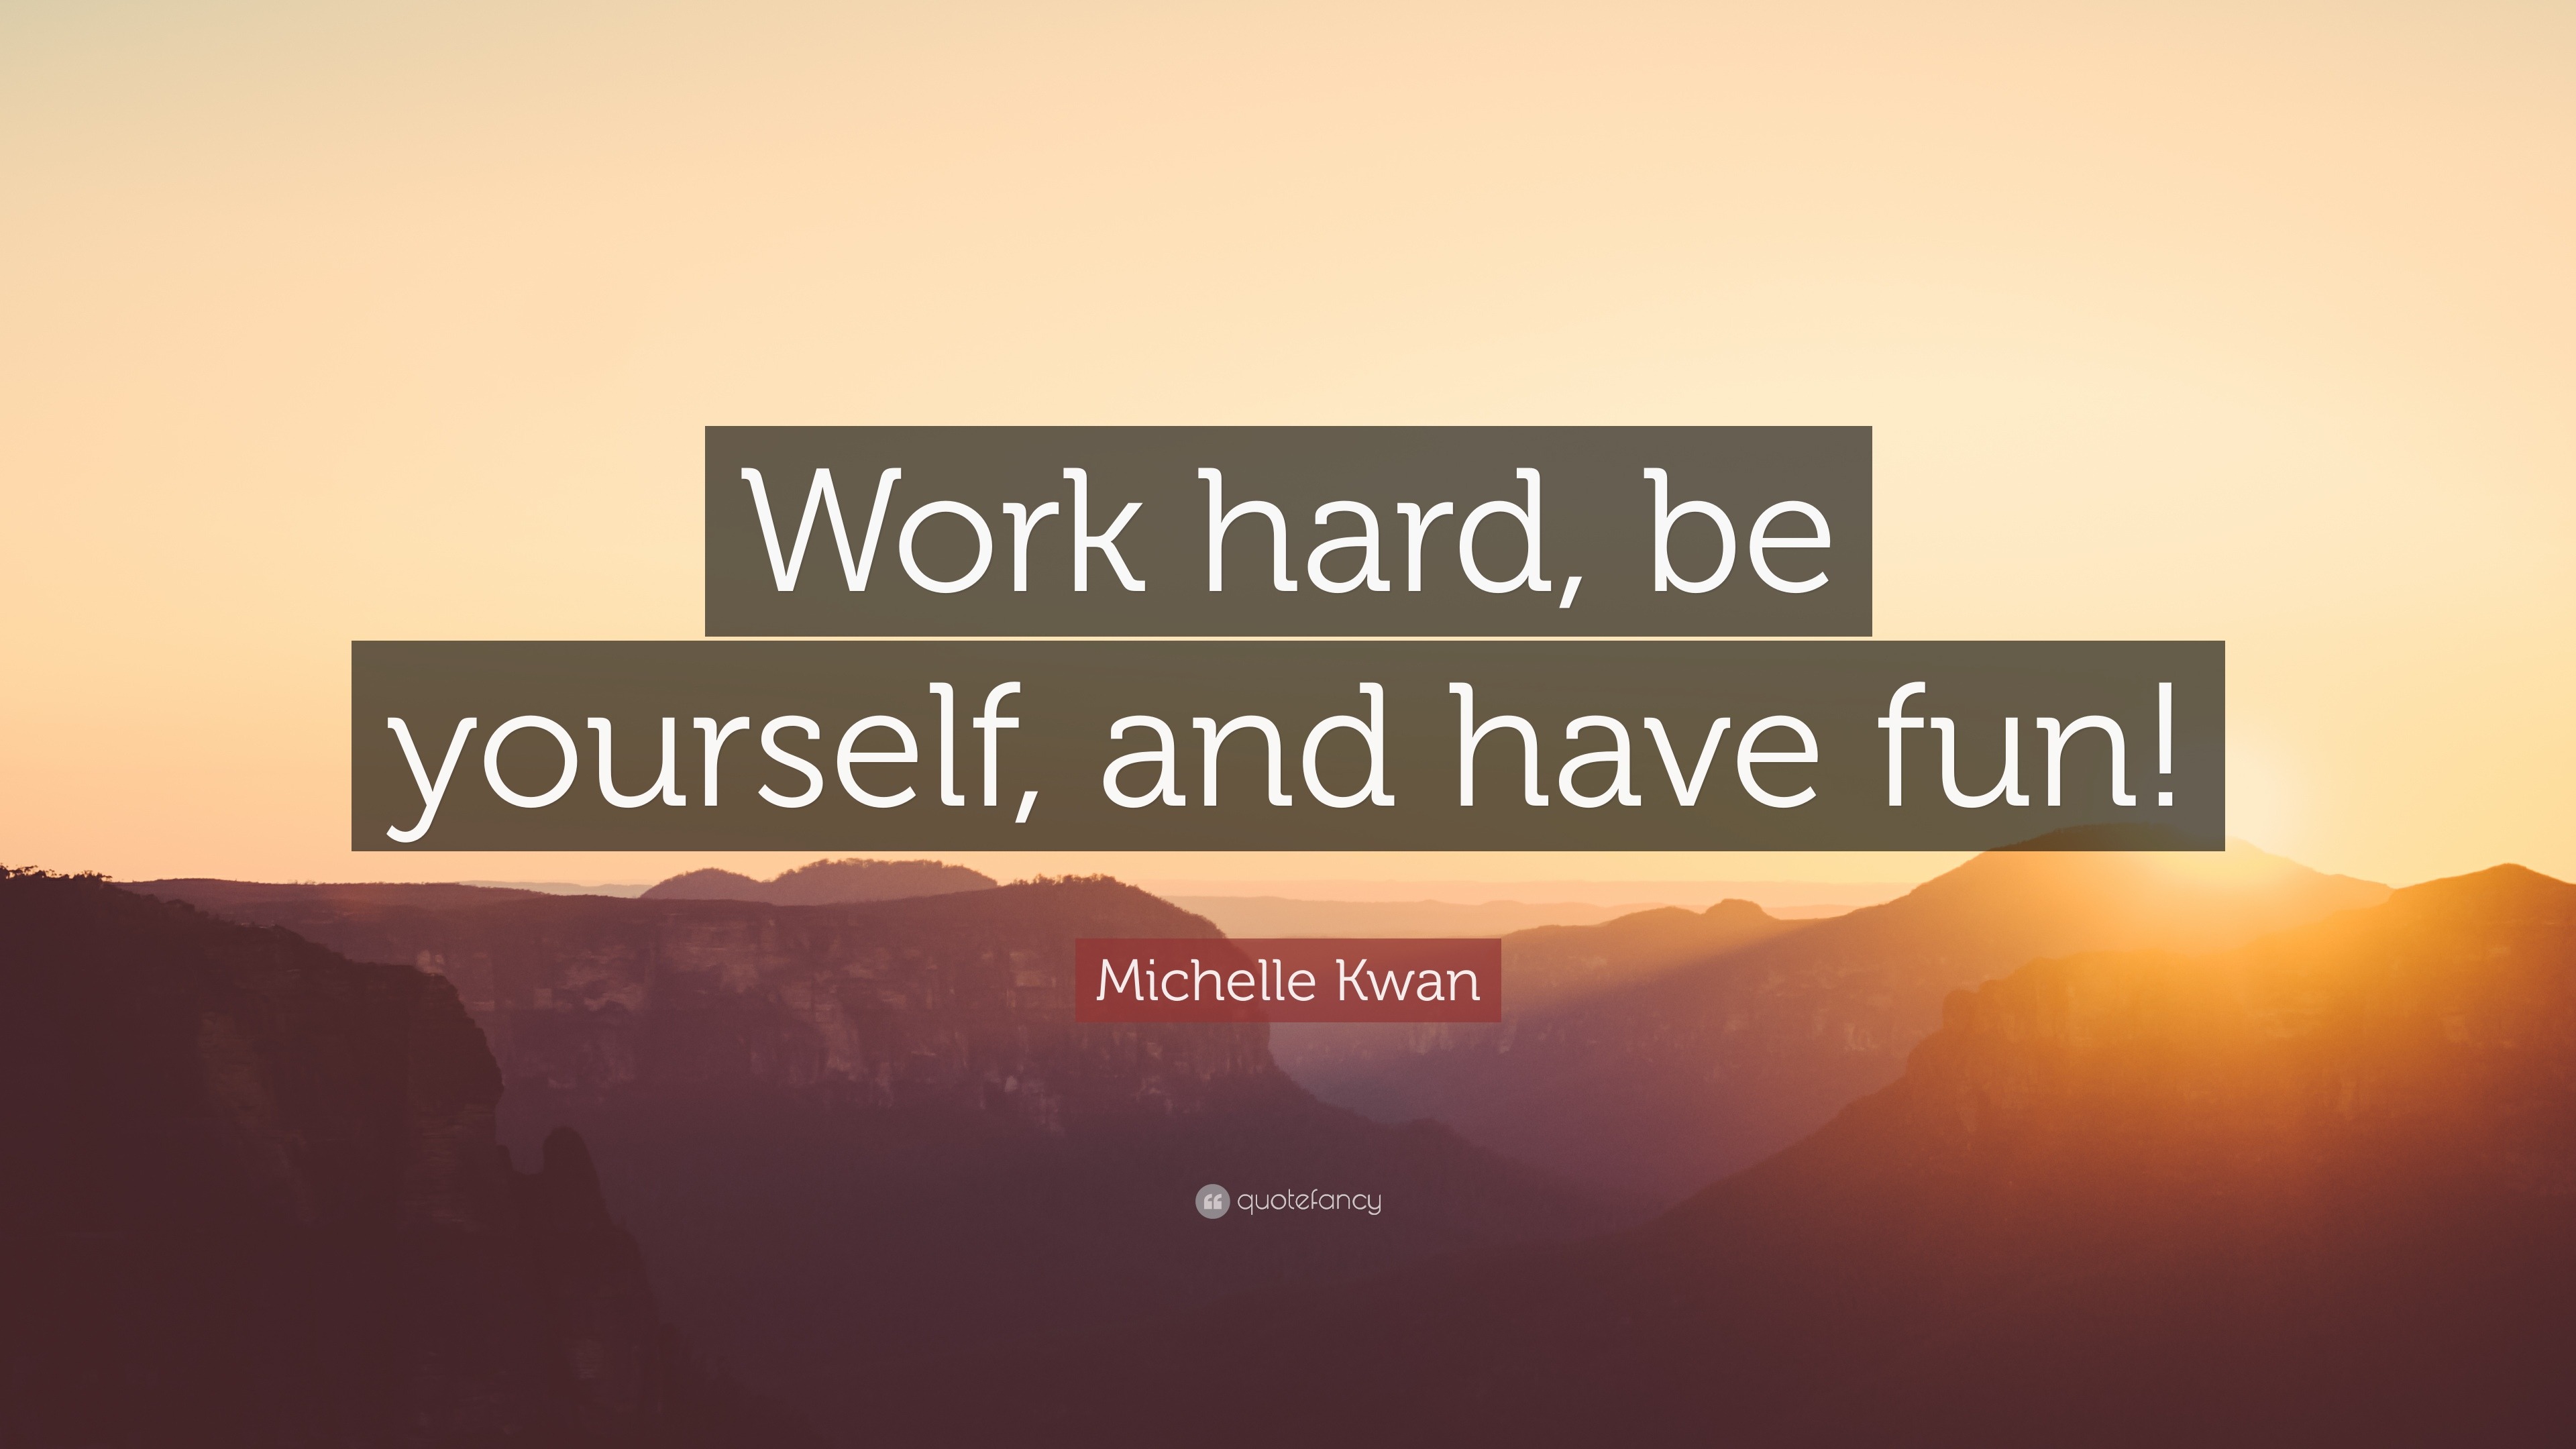 michelle-kwan-quote-work-hard-be-yourself-and-have-fun